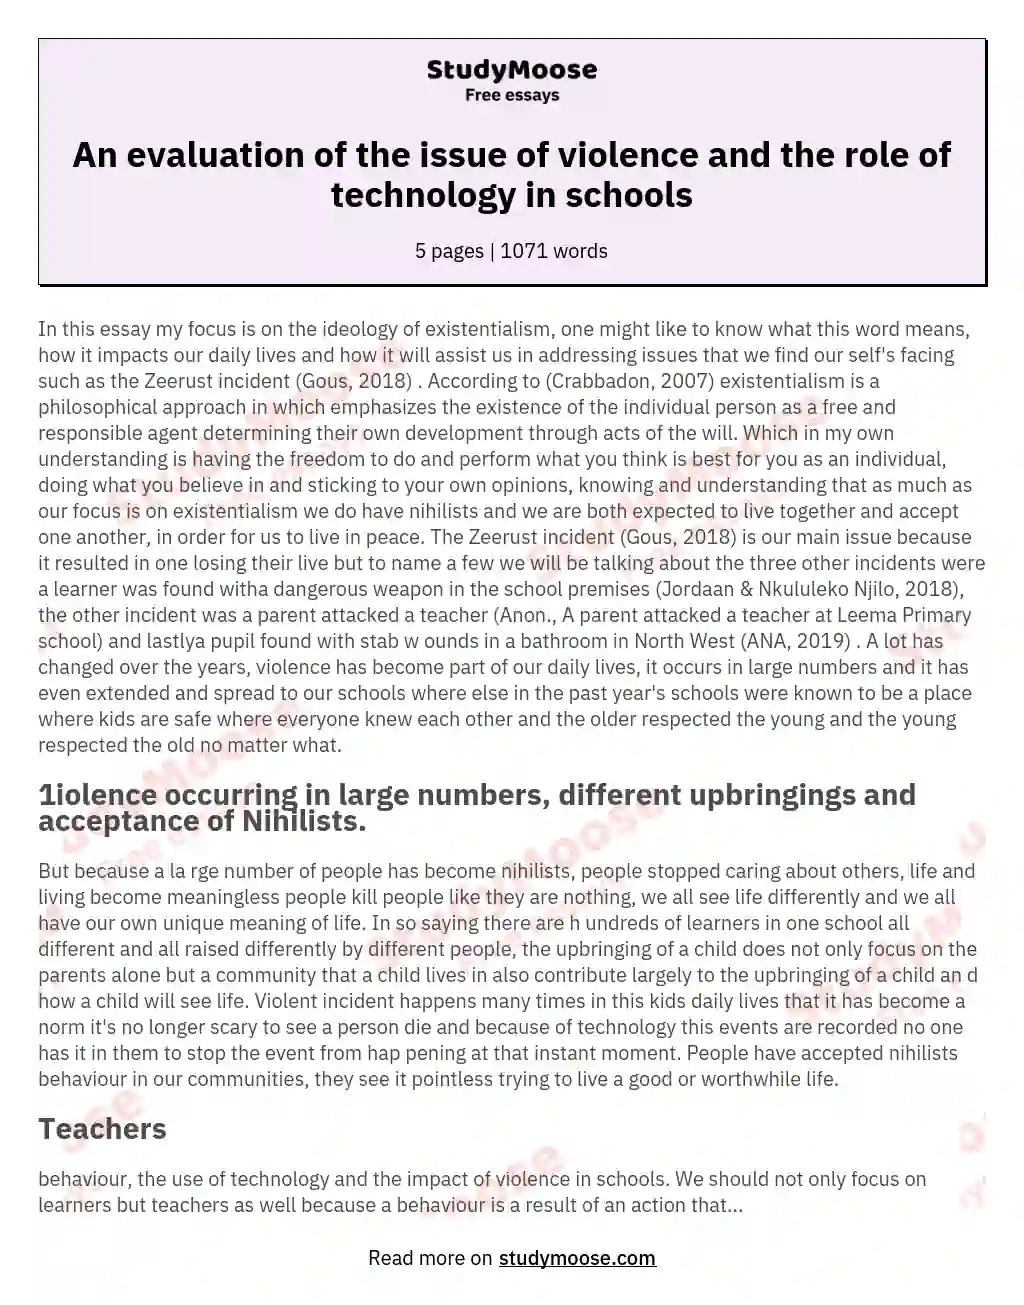 An evaluation of the issue of violence and the role of technology in schools essay